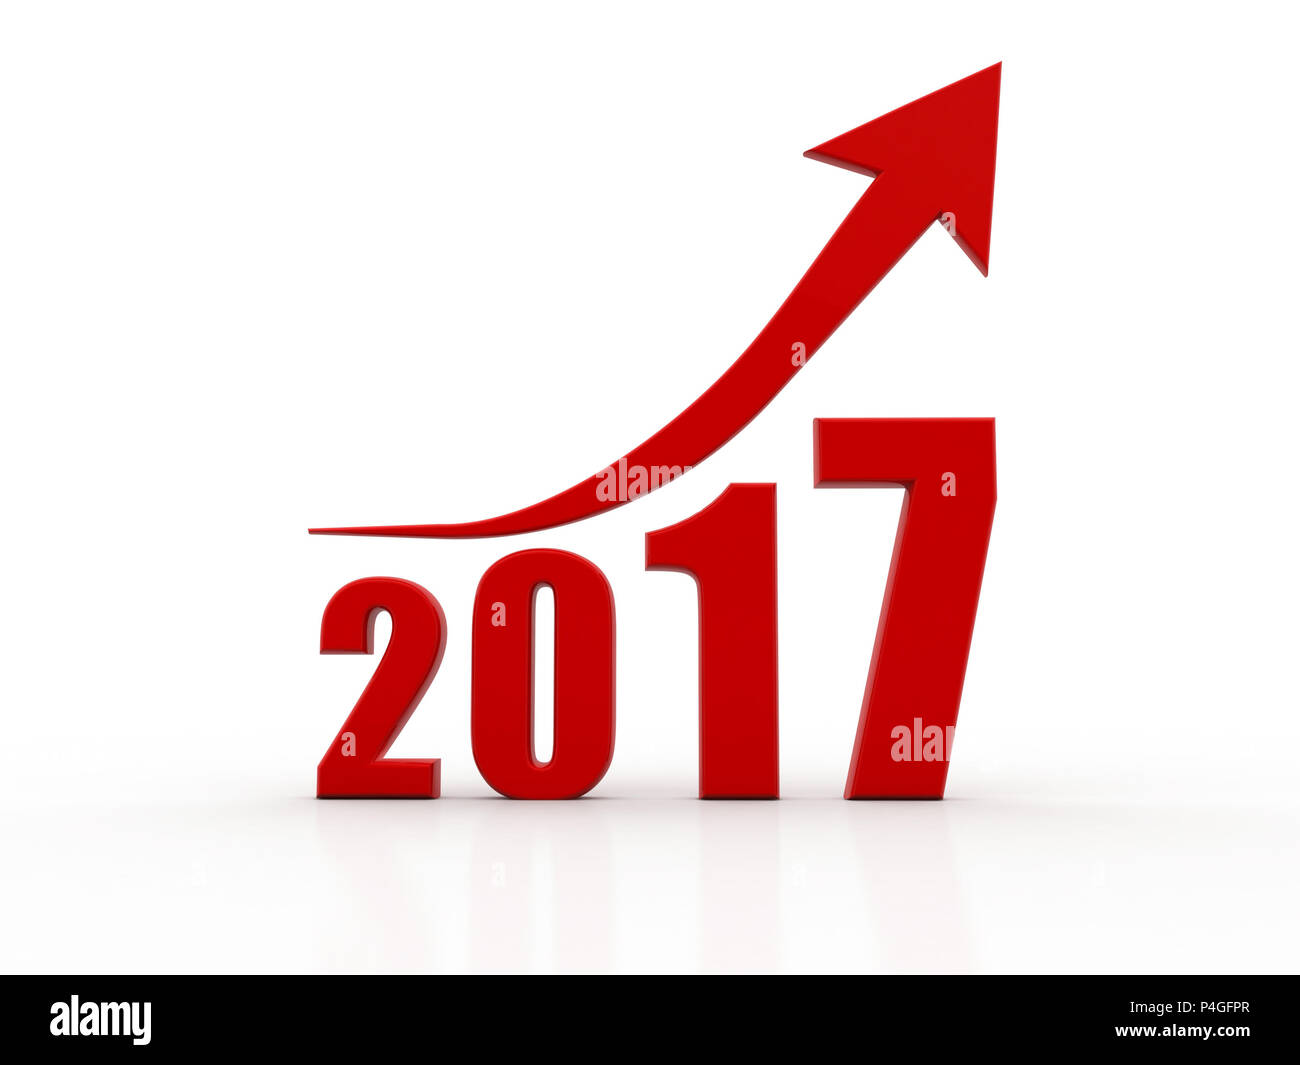 3d illustration of 2017 year sign and arrow Stock Photo